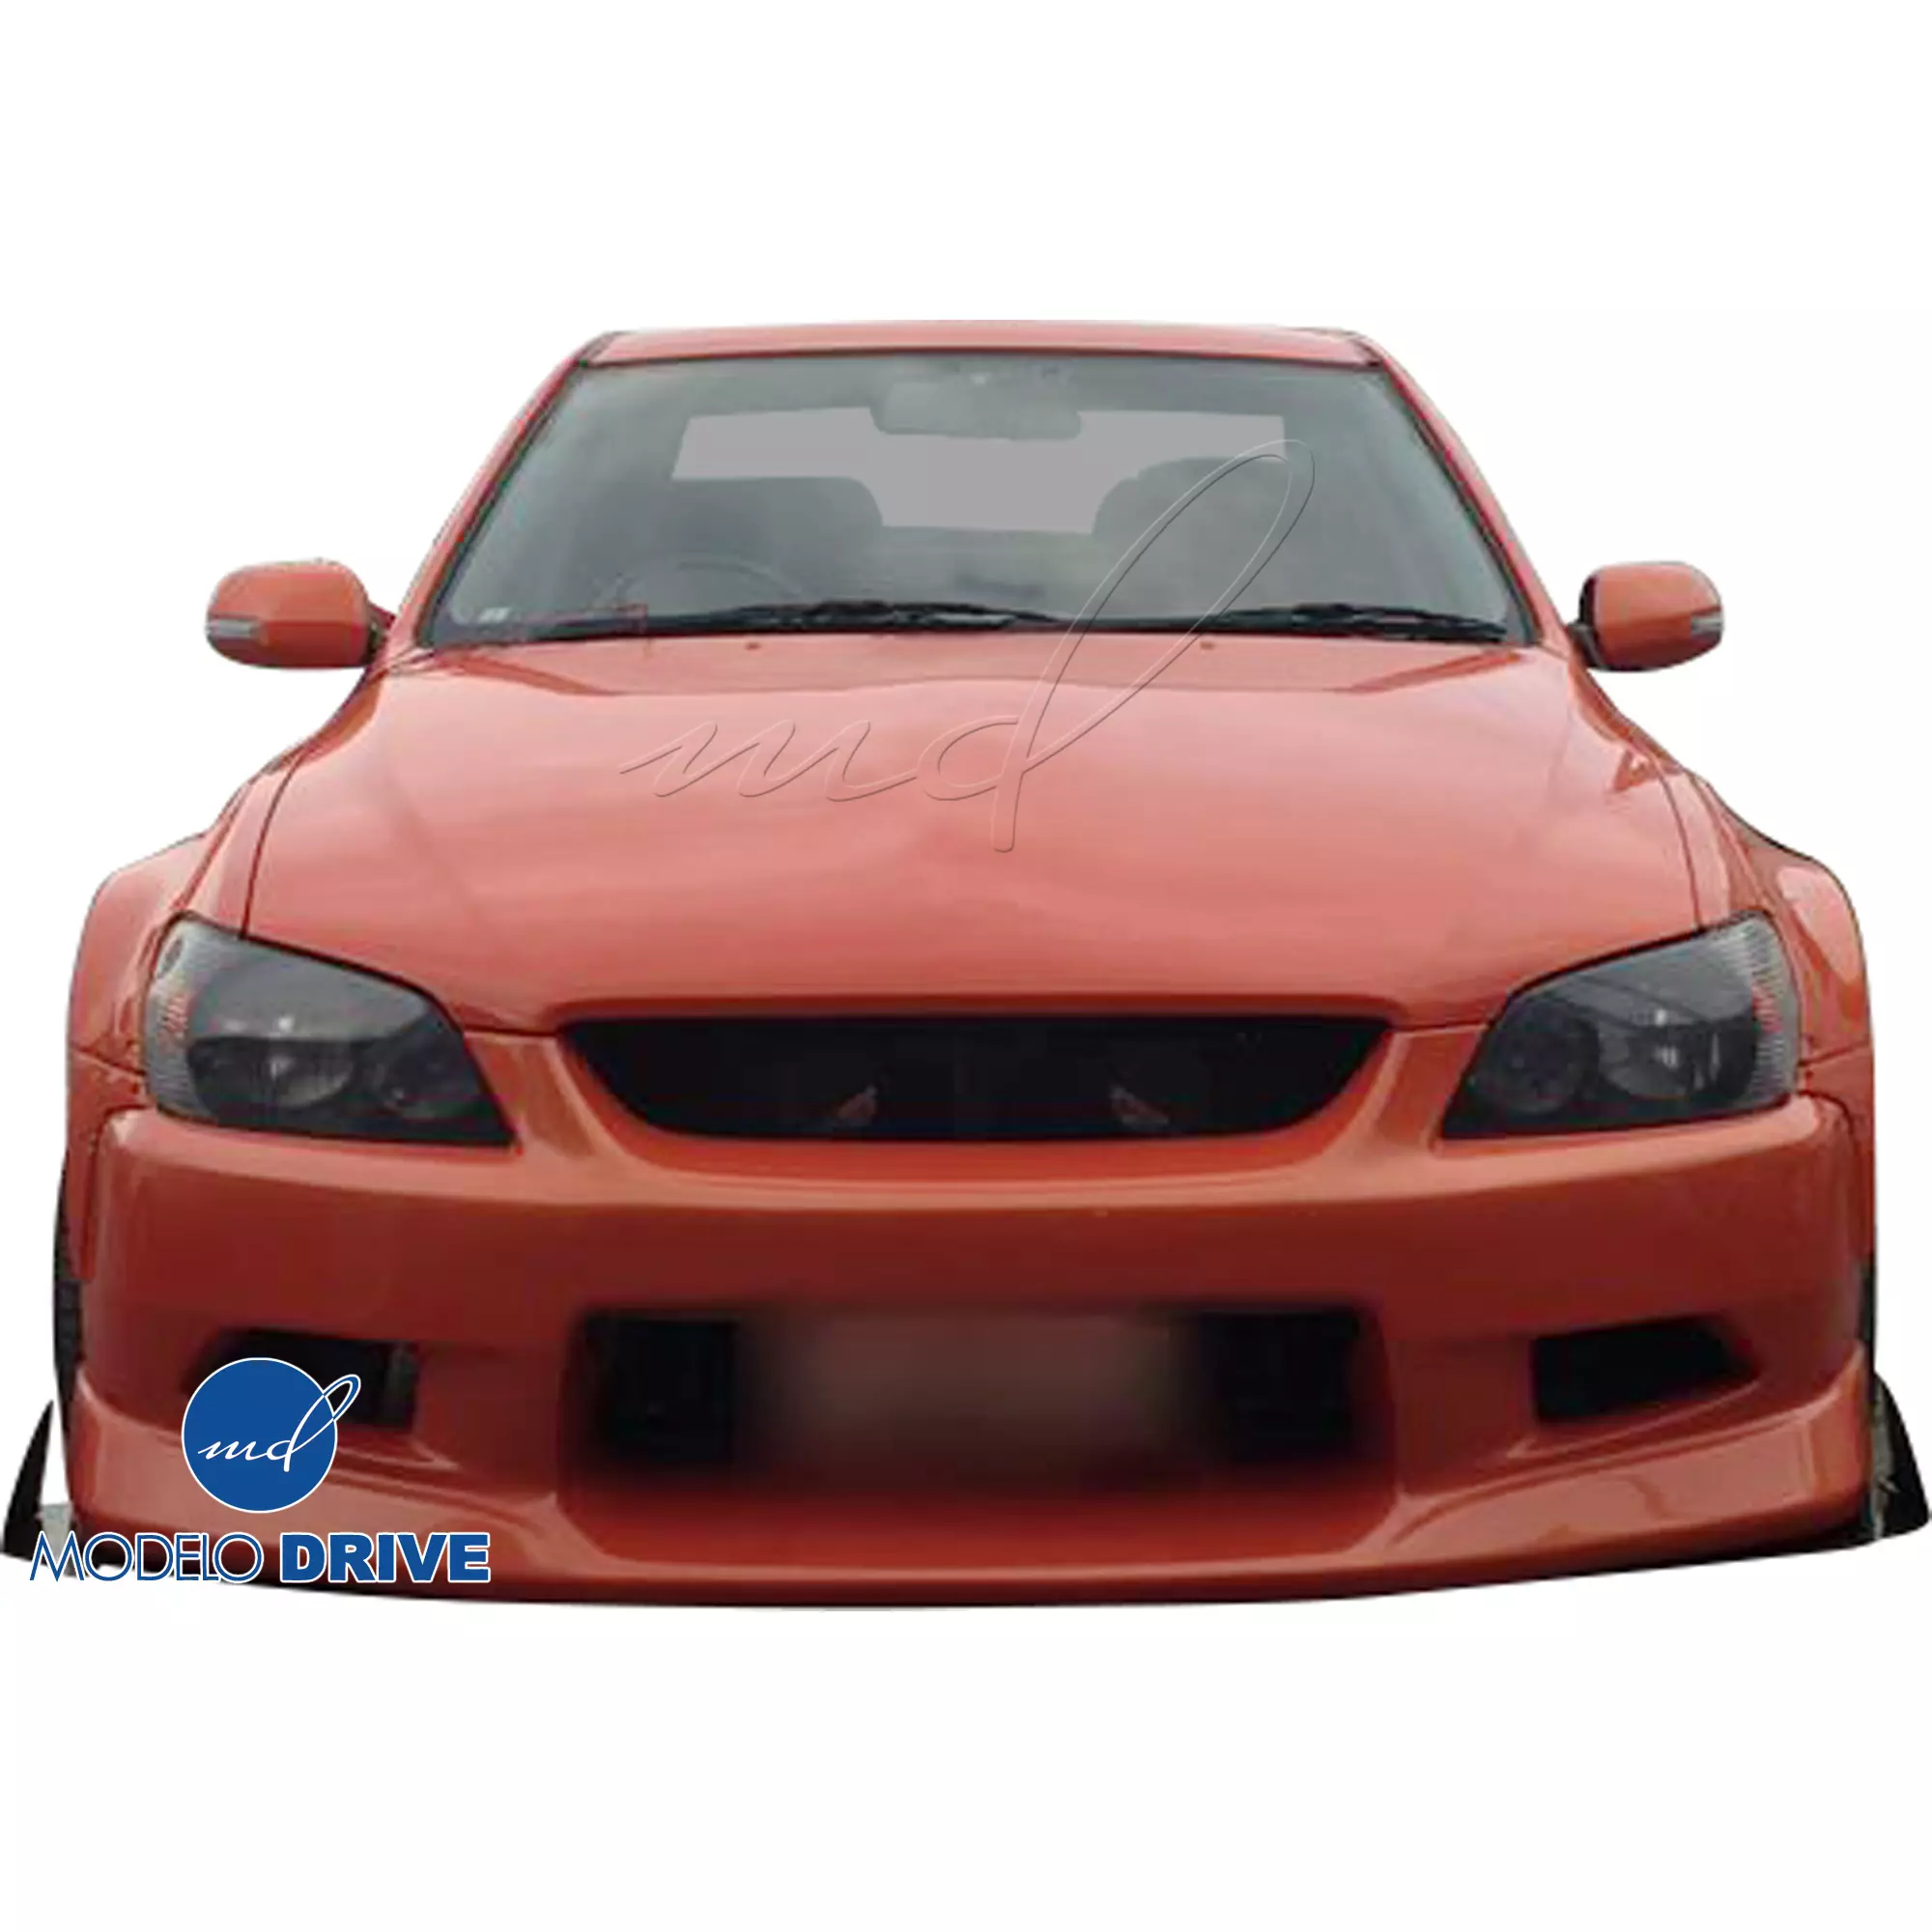 ModeloDrive FRP MSV Wide Body 30/65 Fender Flare Set 8pc > Lexus IS Series IS300 2000-2005> 4dr - Image 38